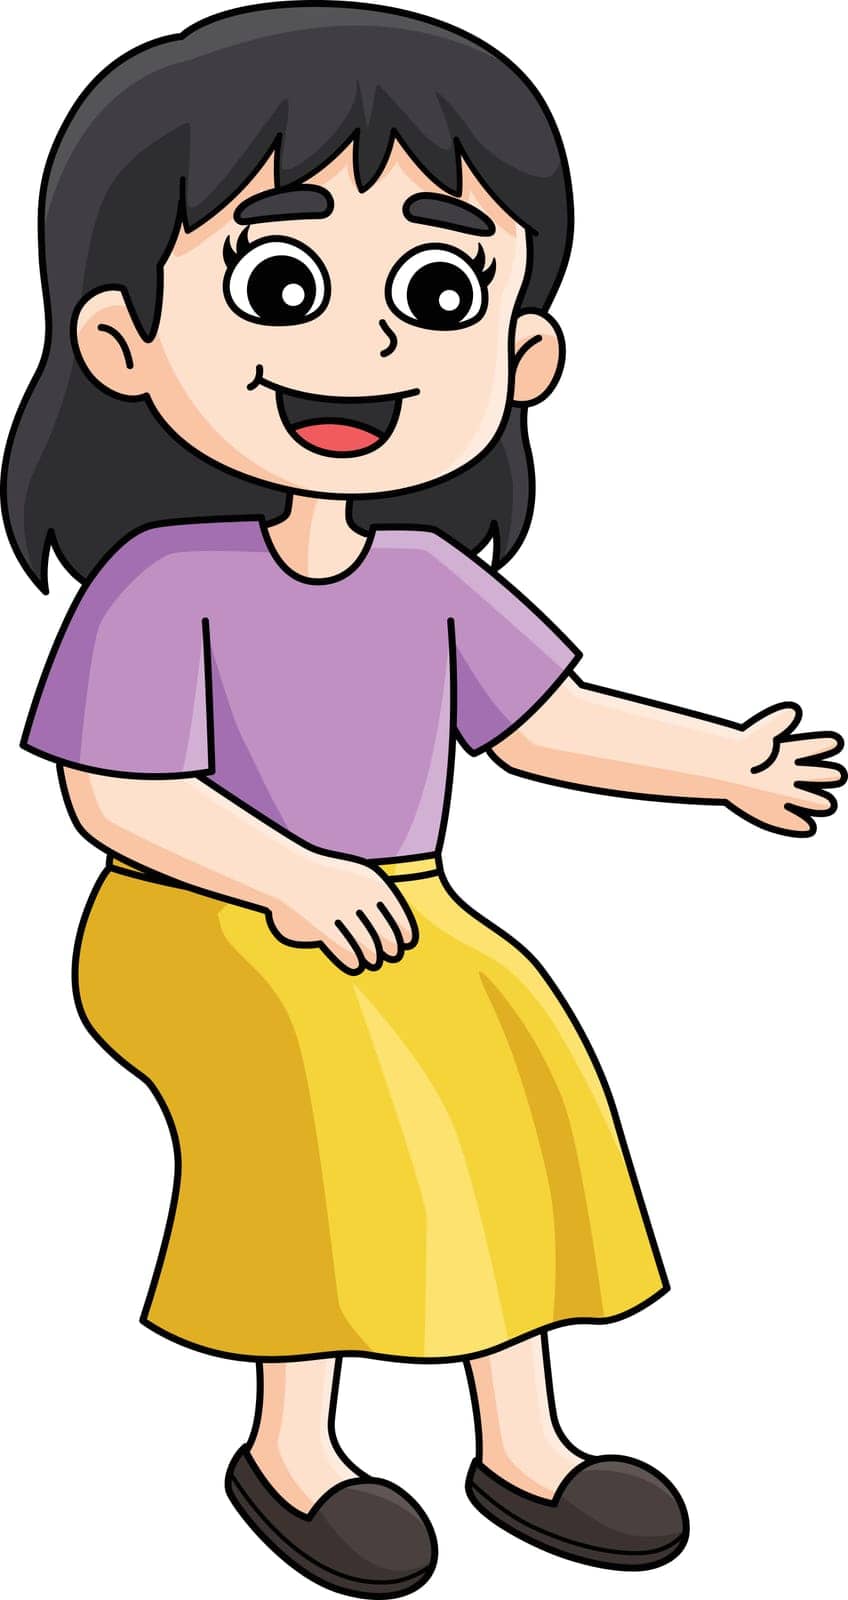 This cartoon clipart shows a Sitting Mother illustration.